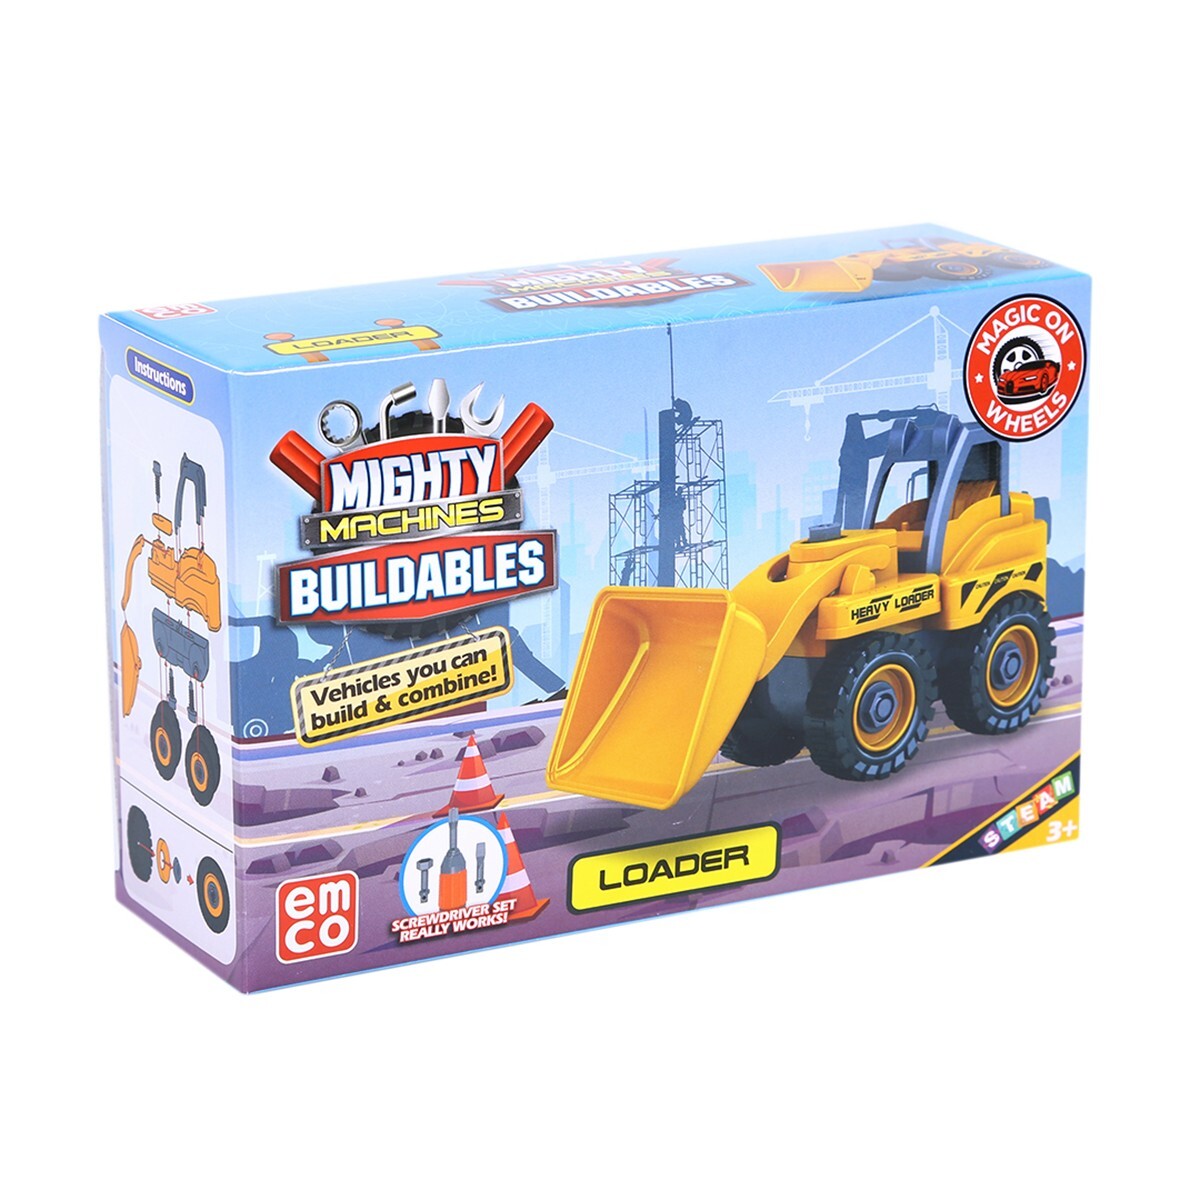 Win Machins Buildables Loader Mb70001